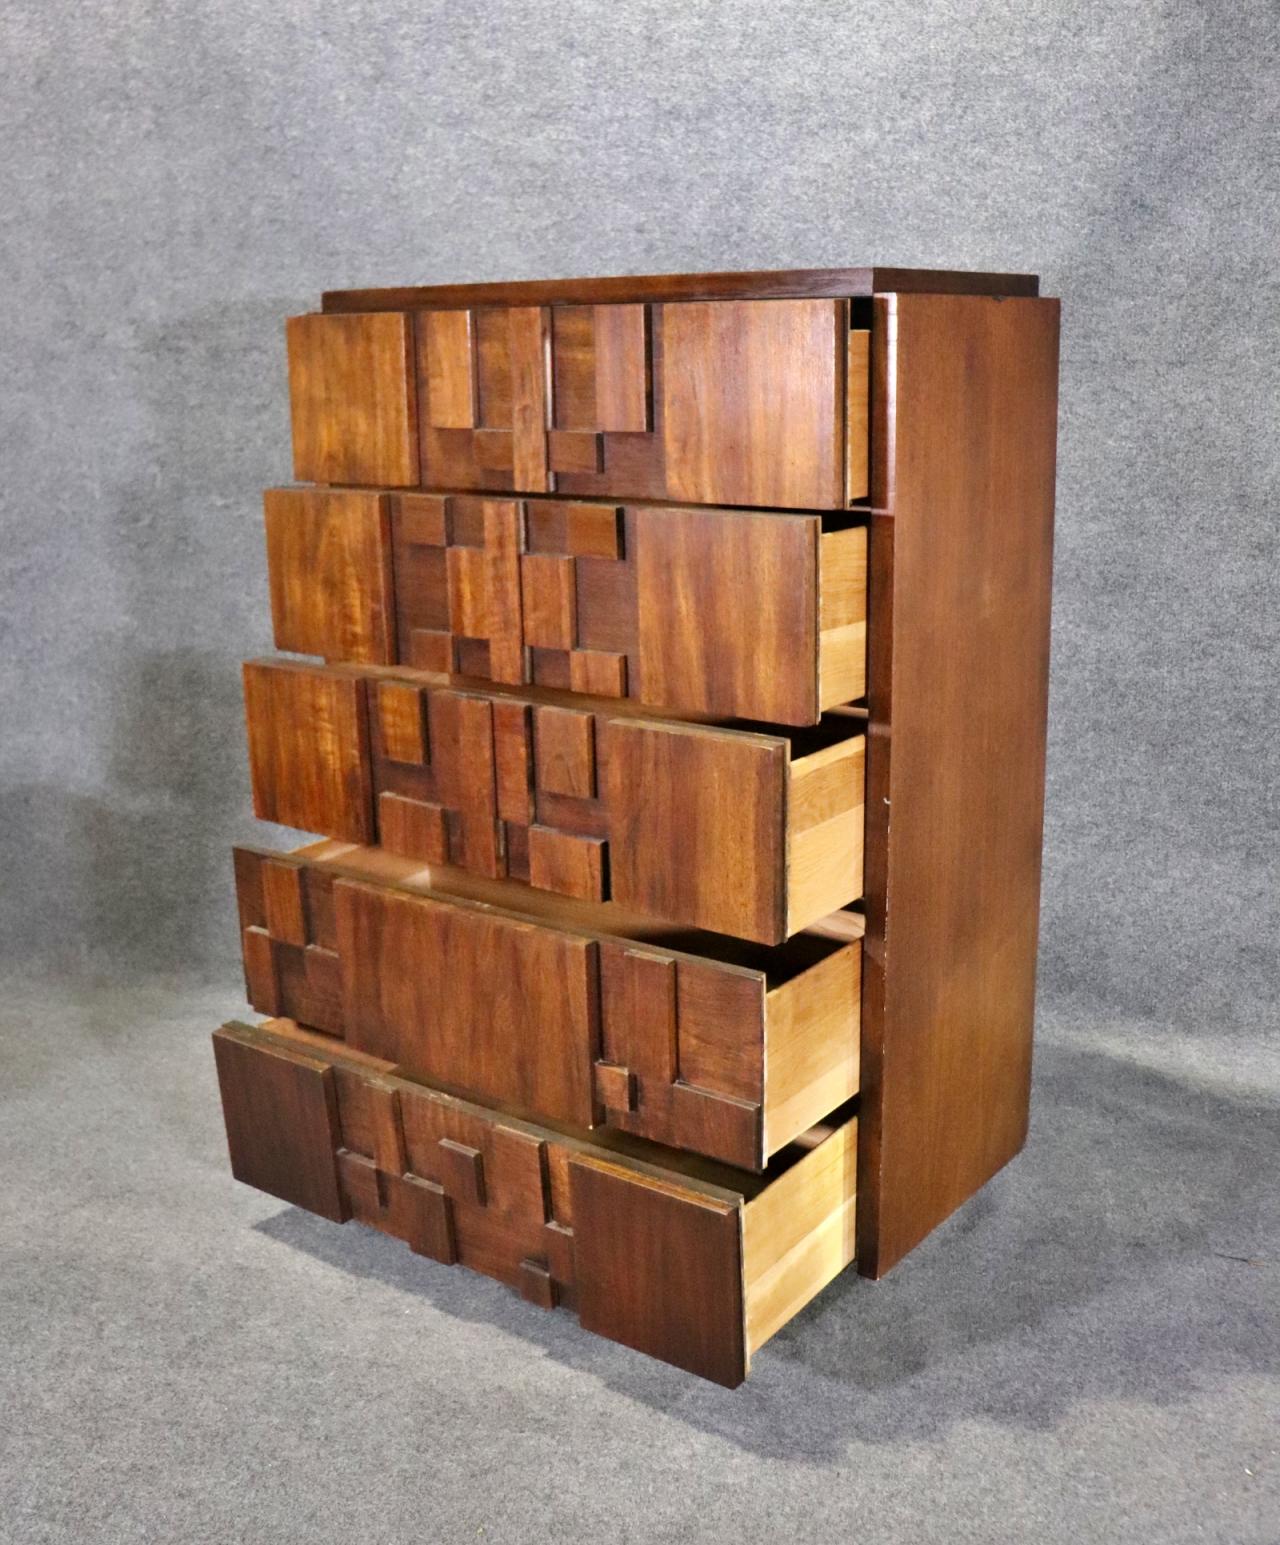 Mid-century modern tall dresser by Lane Furniture for their 'Staccato' series. Featuring five wide and deep drawers with a mosaic wood patchwork design.
Please confirm location NY or NJ